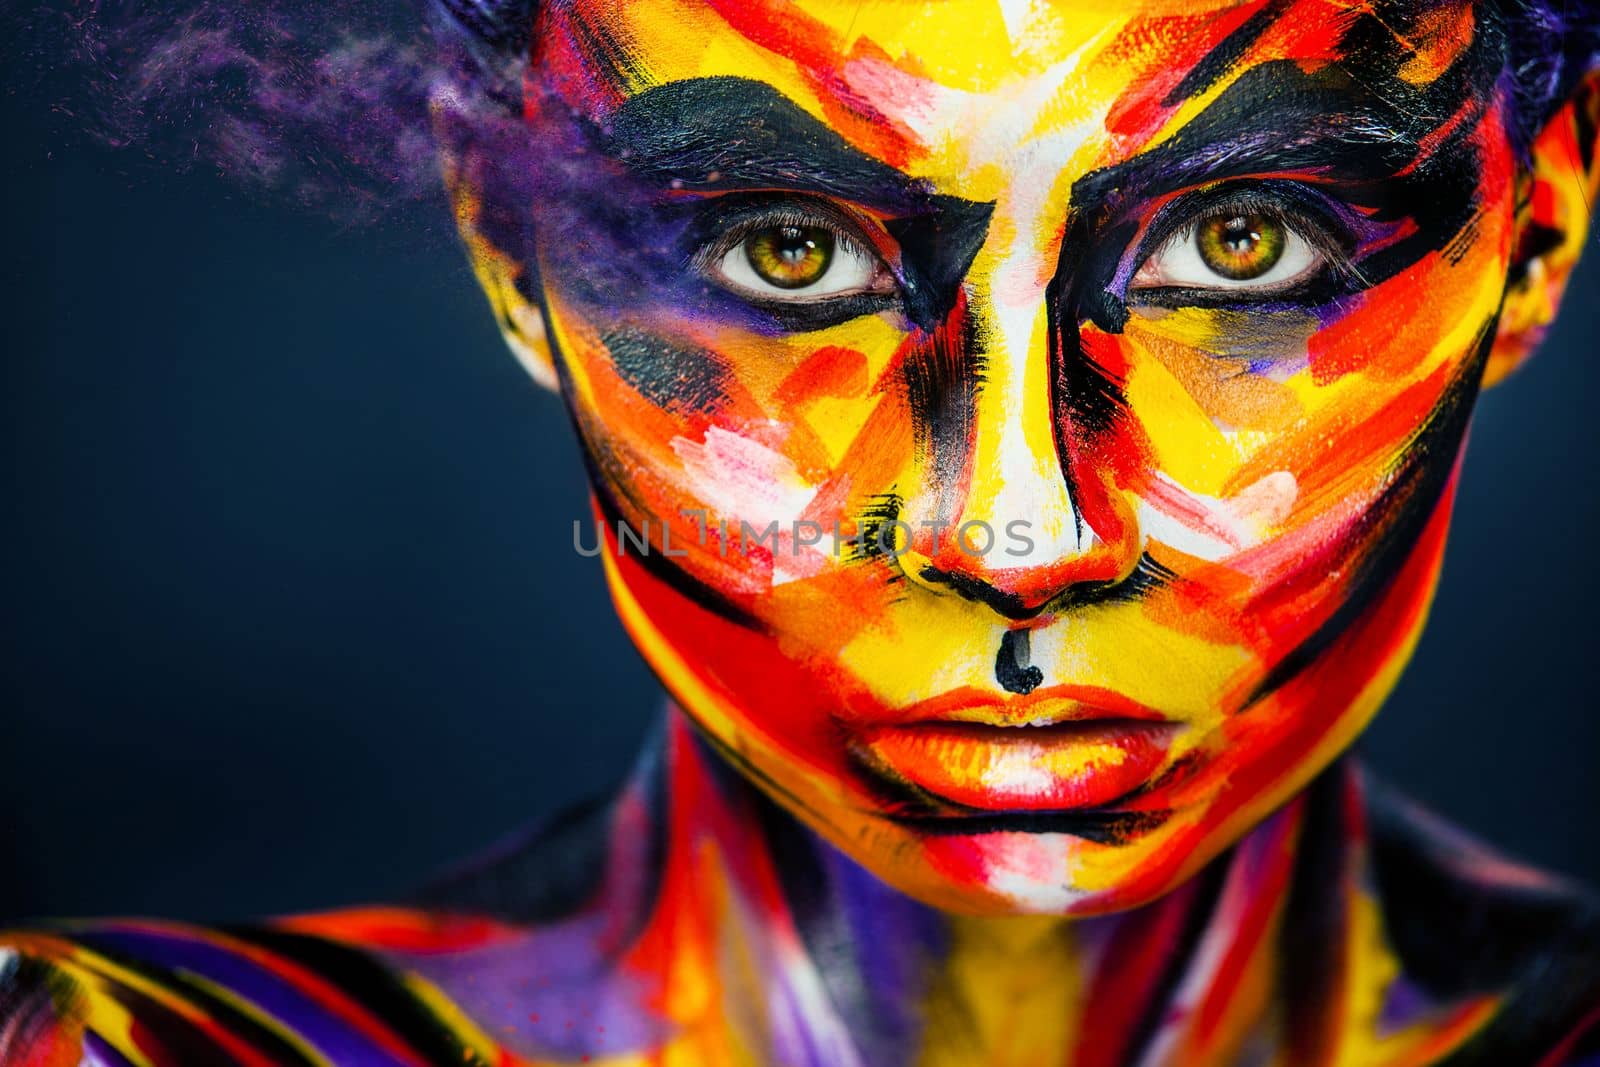 Portrait of the bright beautiful young woman with art make-up on dark background